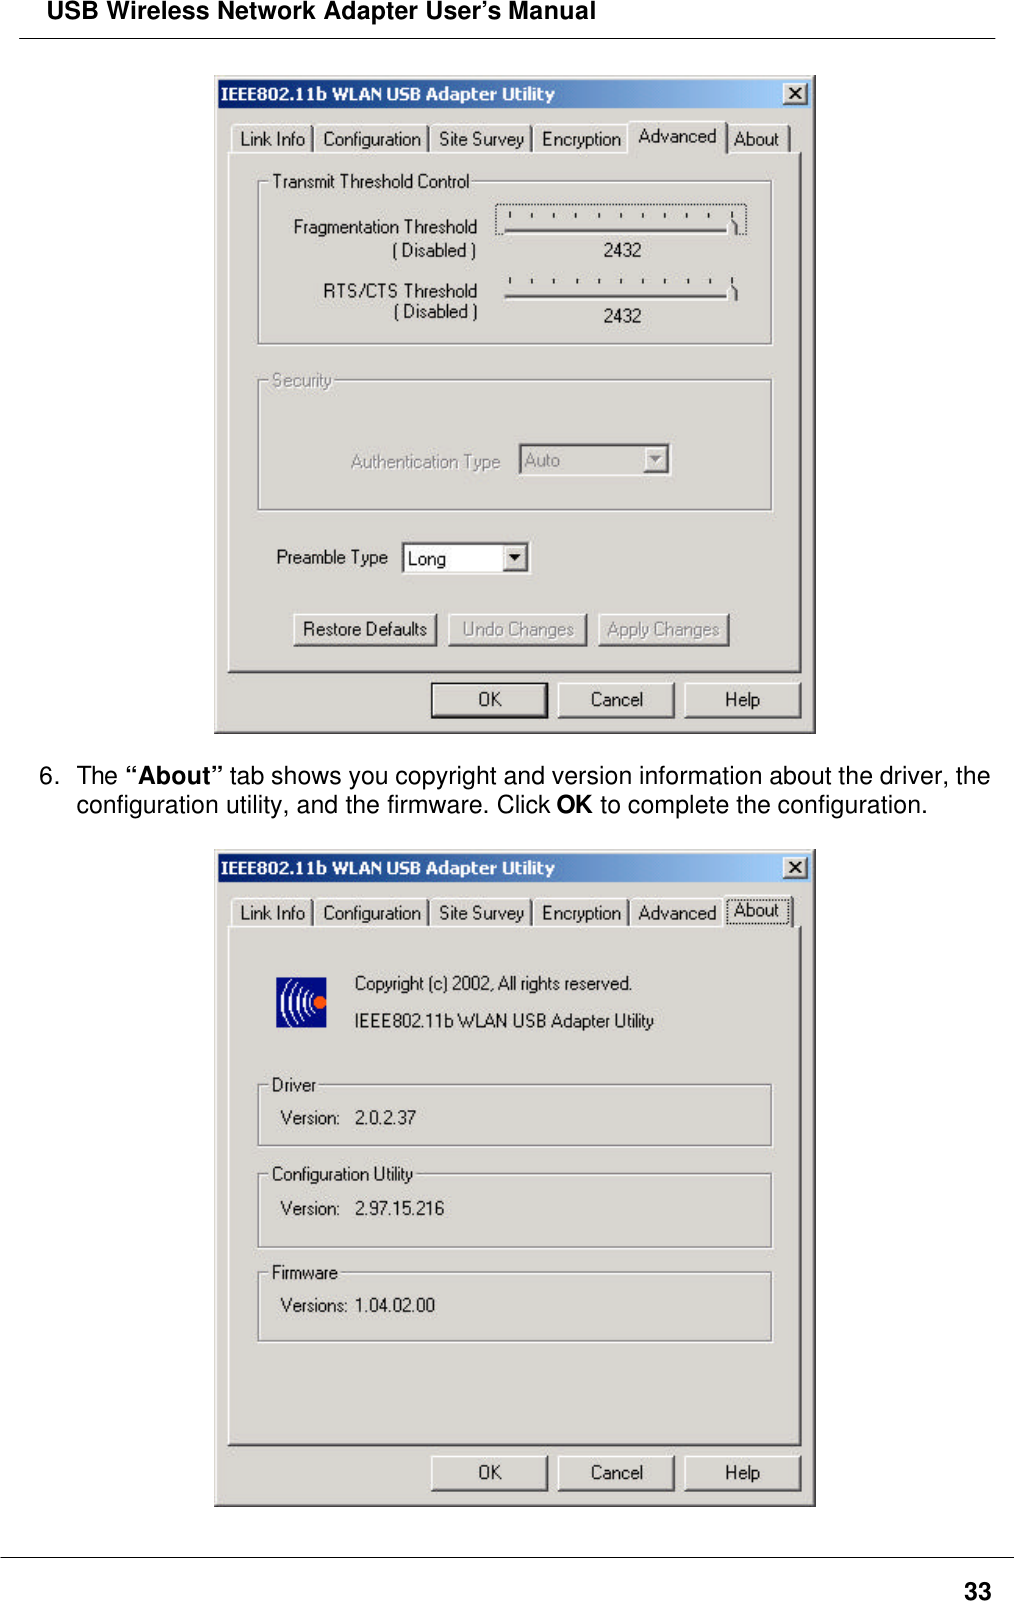  USB Wireless Network Adapter User’s Manual336. The “About” tab shows you copyright and version information about the driver, theconfiguration utility, and the firmware. Click OK to complete the configuration.